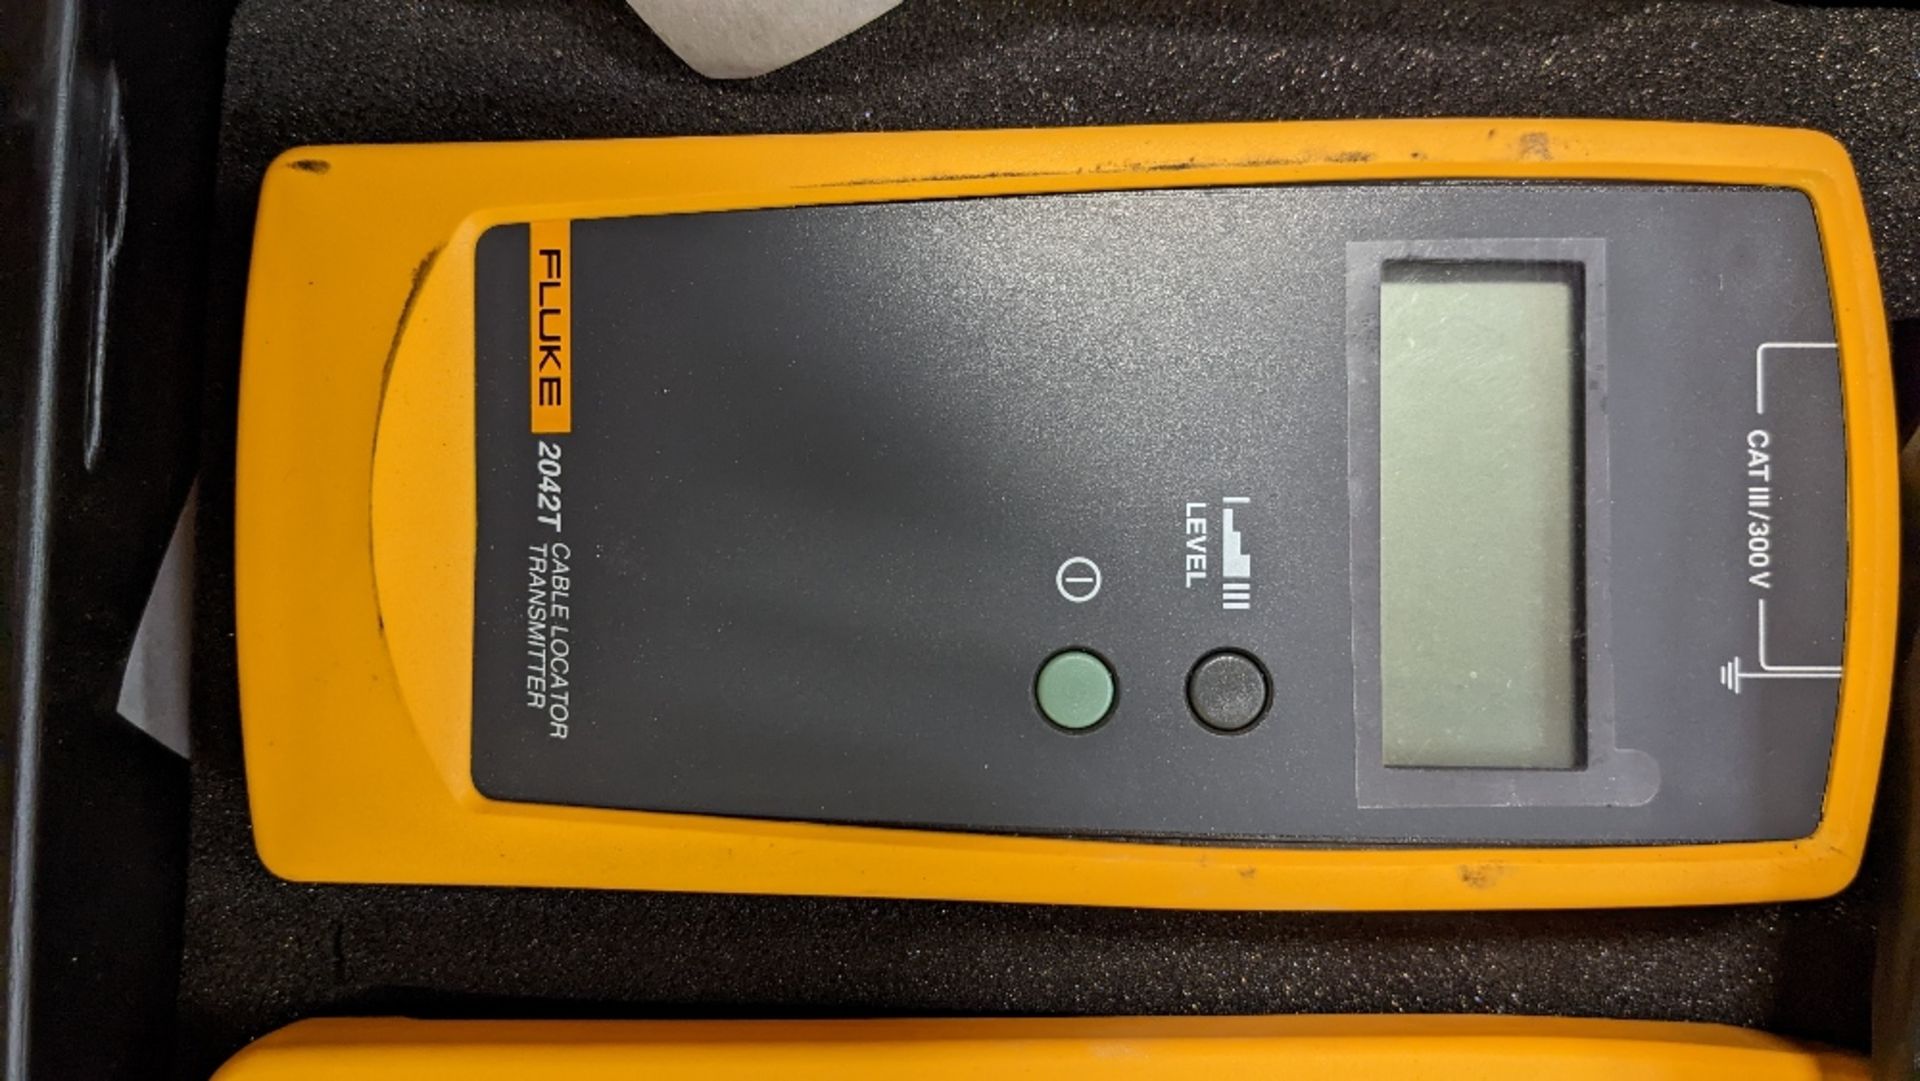 FLUKE 2042 cable locator transmitter and receiver - Image 2 of 4